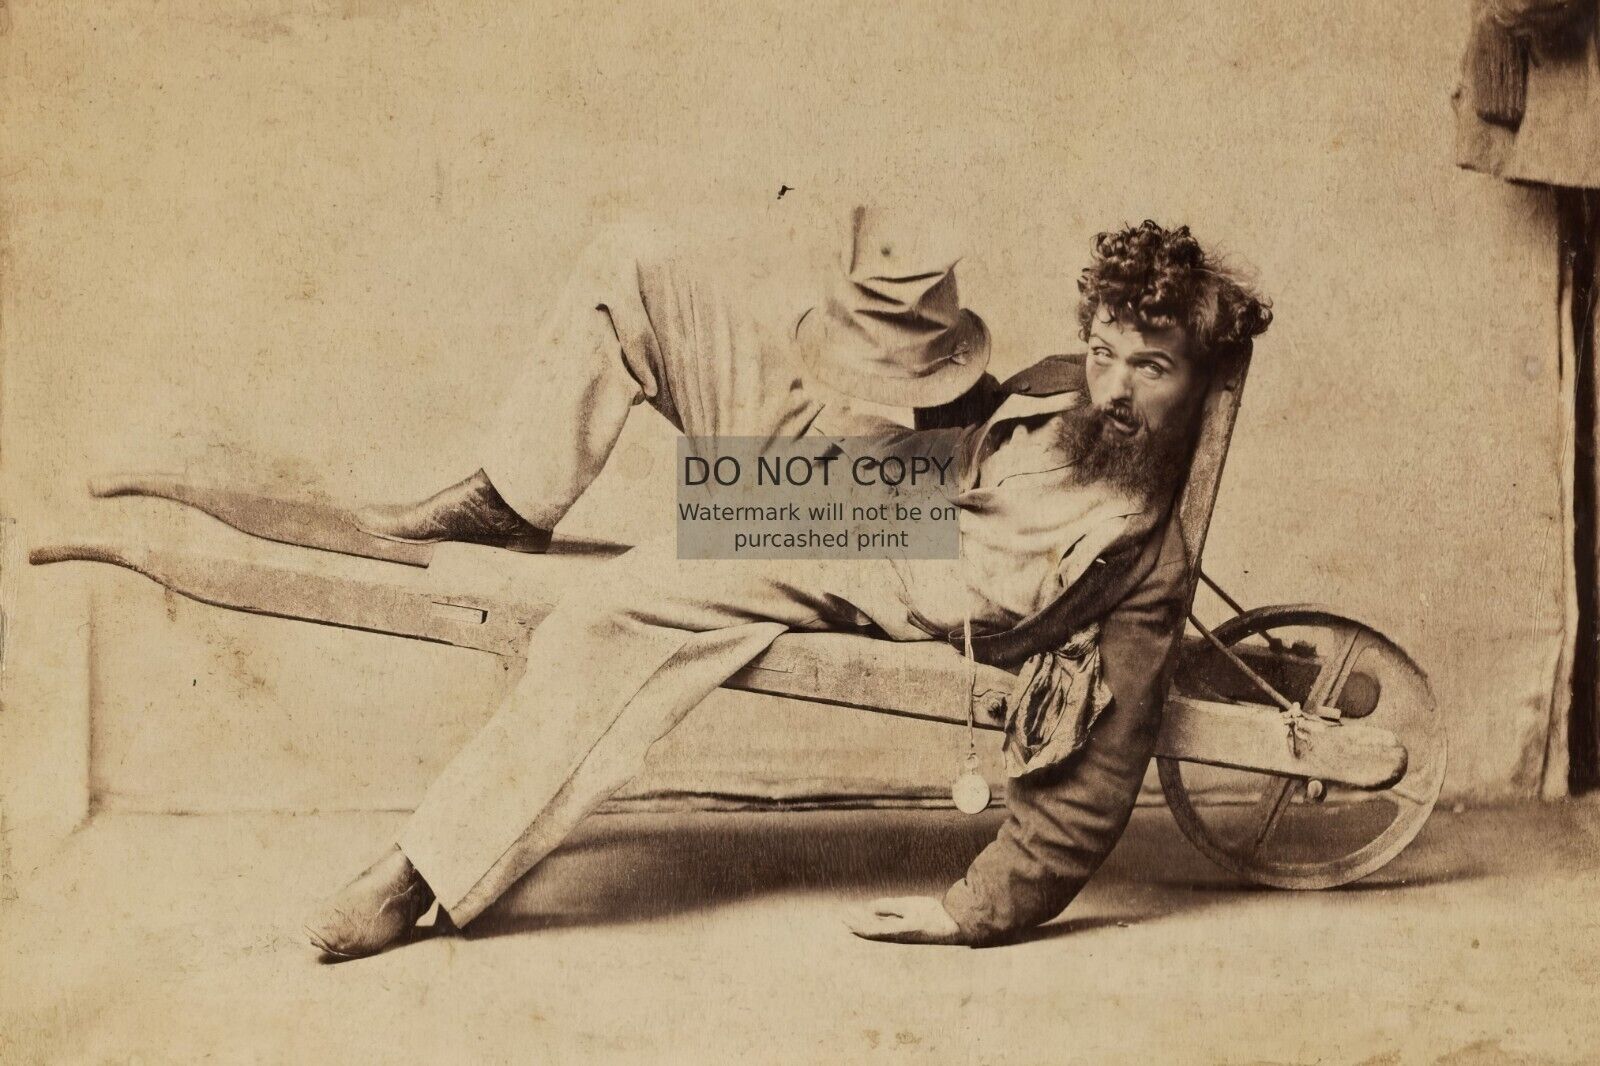 DRUNK MAN LAYING PASSED OUT IN WHEELBARROW VINTAGE 1800s 4X6 PHOTO POSTCARD